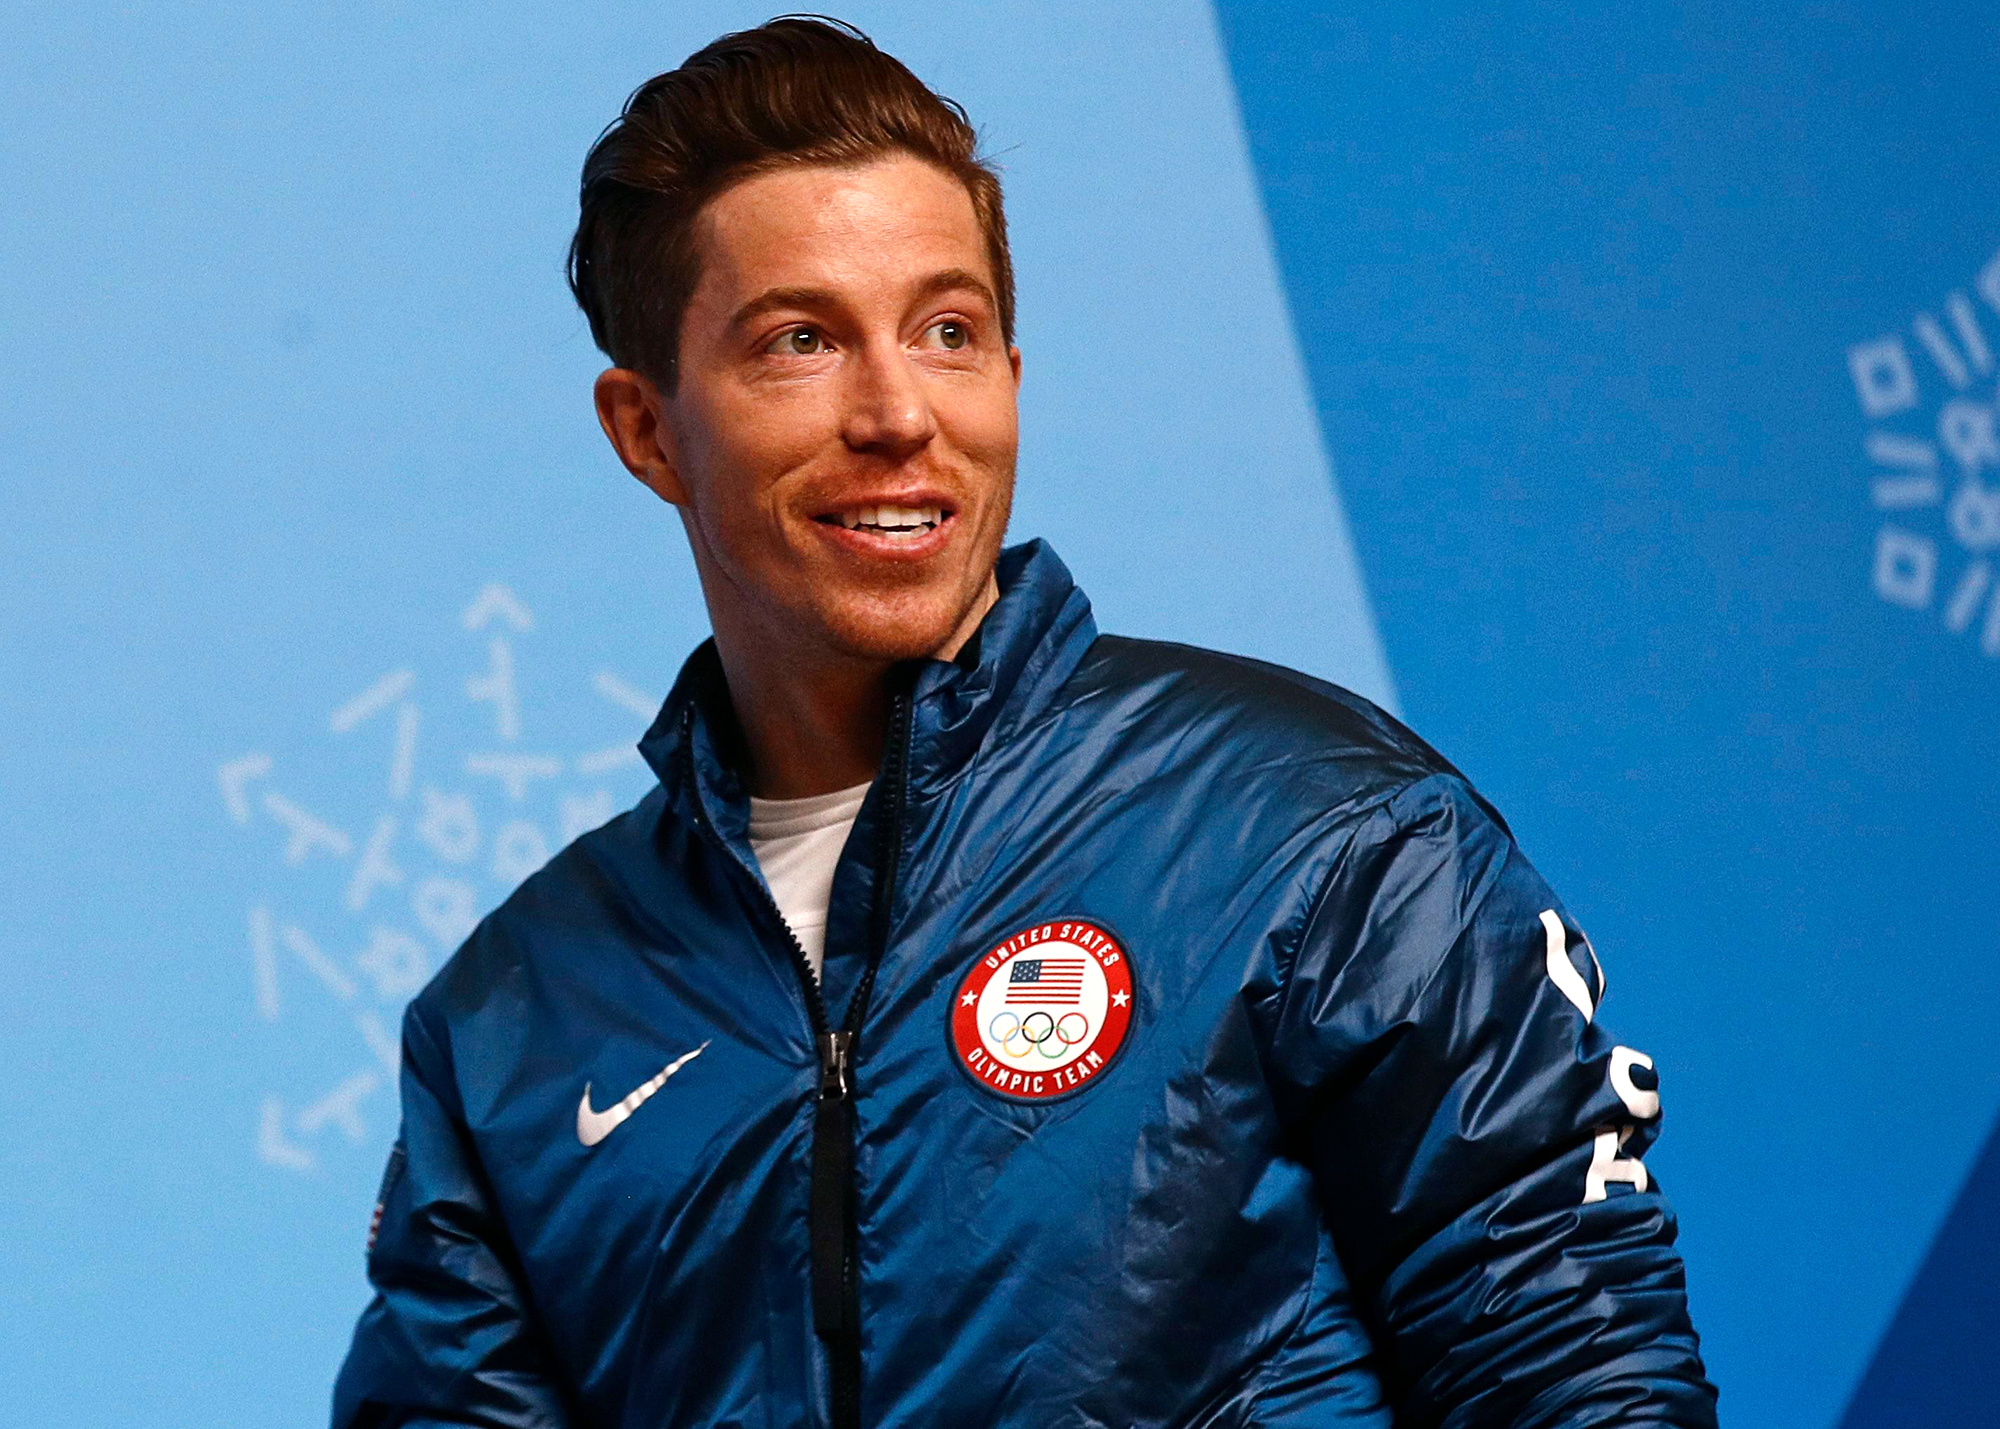 The Most Stylish Olympians of All Time  Shaun white snowboarding, Shaun  white, Shaun white olympics